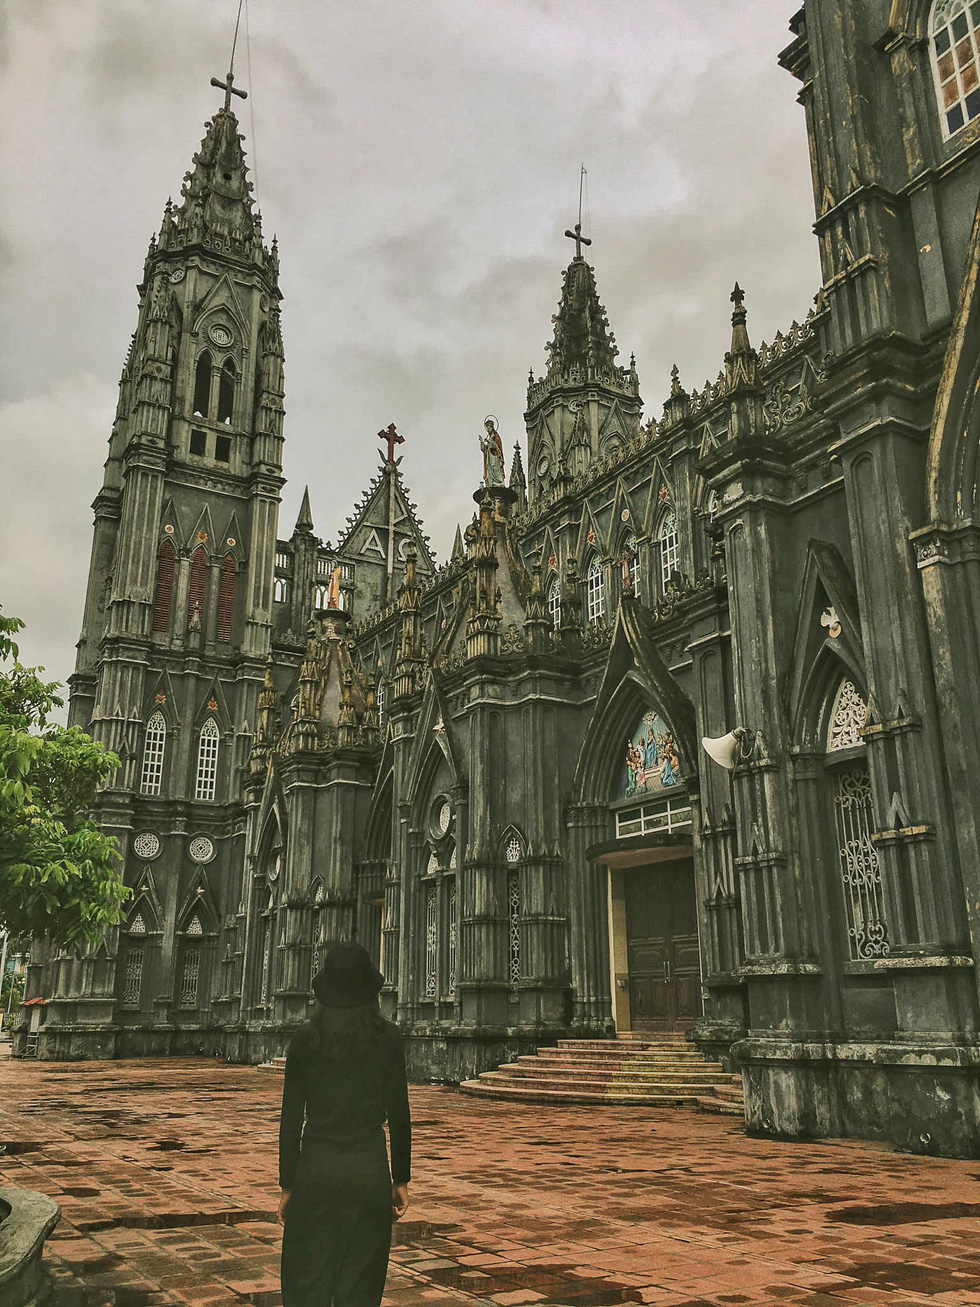 Being nearly 100 years old, Hung Nghia Church in Hai Hung Commune, Hai Hau District has a very European vibe. It’s the grey color tone, together with its gothic architecture, feels like being transported to Hogwarts. Photo: Hai Yen / Tuoi Tre